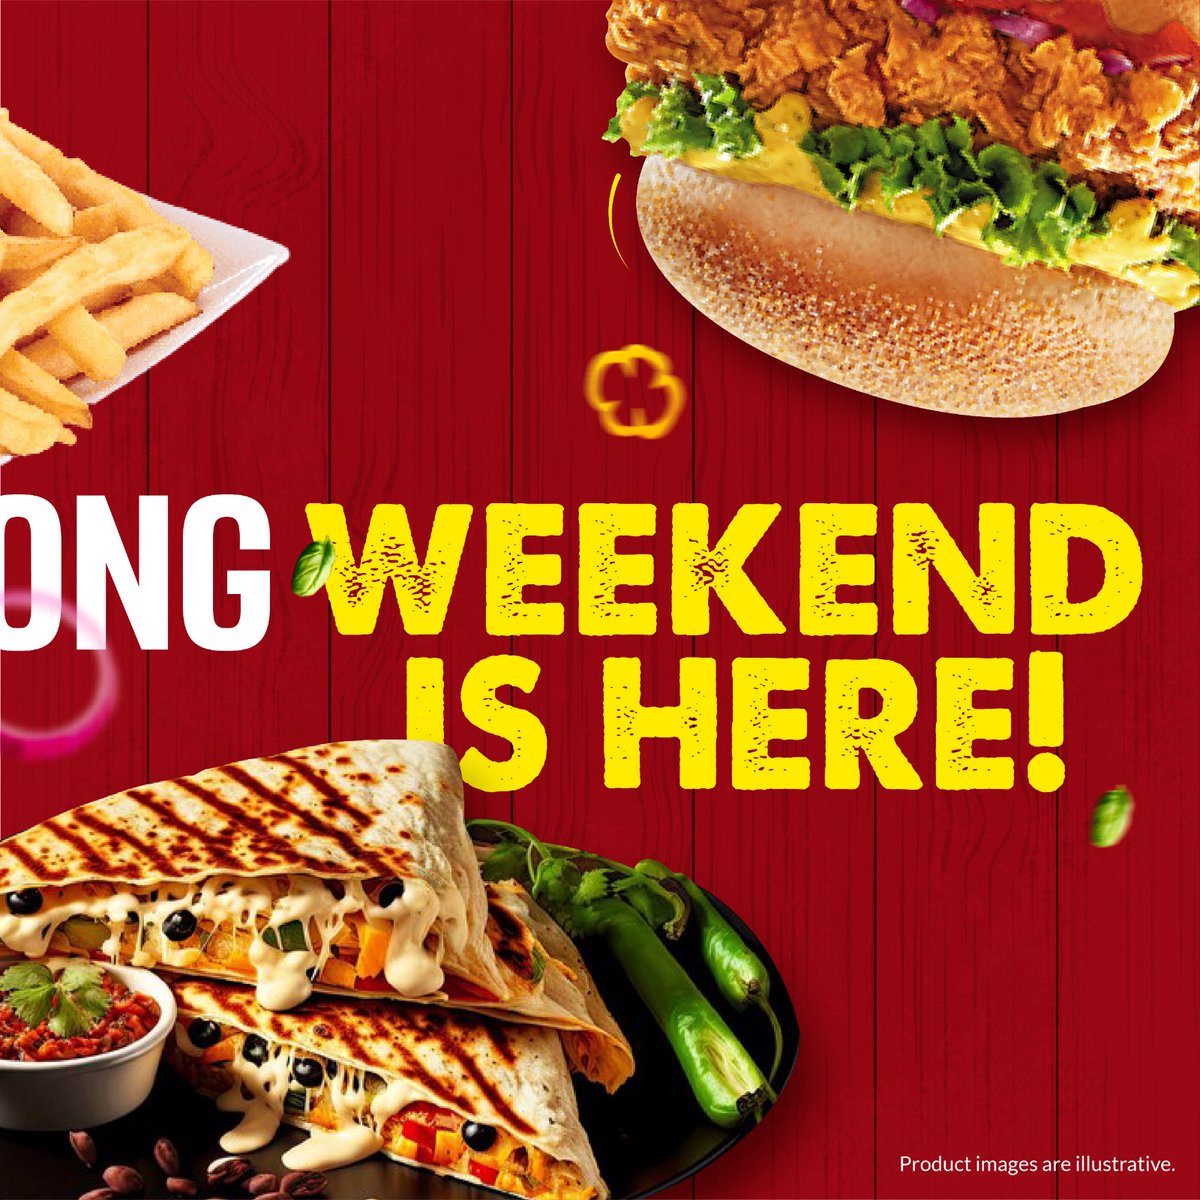 Are you ready to take your weekend to the next level? Visit
ROC has got you covered for all your party needs. 🍔🍕🍗

#roc #royalonlychicken #bbqburgers #classicburgers #summersizzlers #rocgoa #quesadillalove #roc #royalonlychicken #burger #food #burgerlover #panjim #new